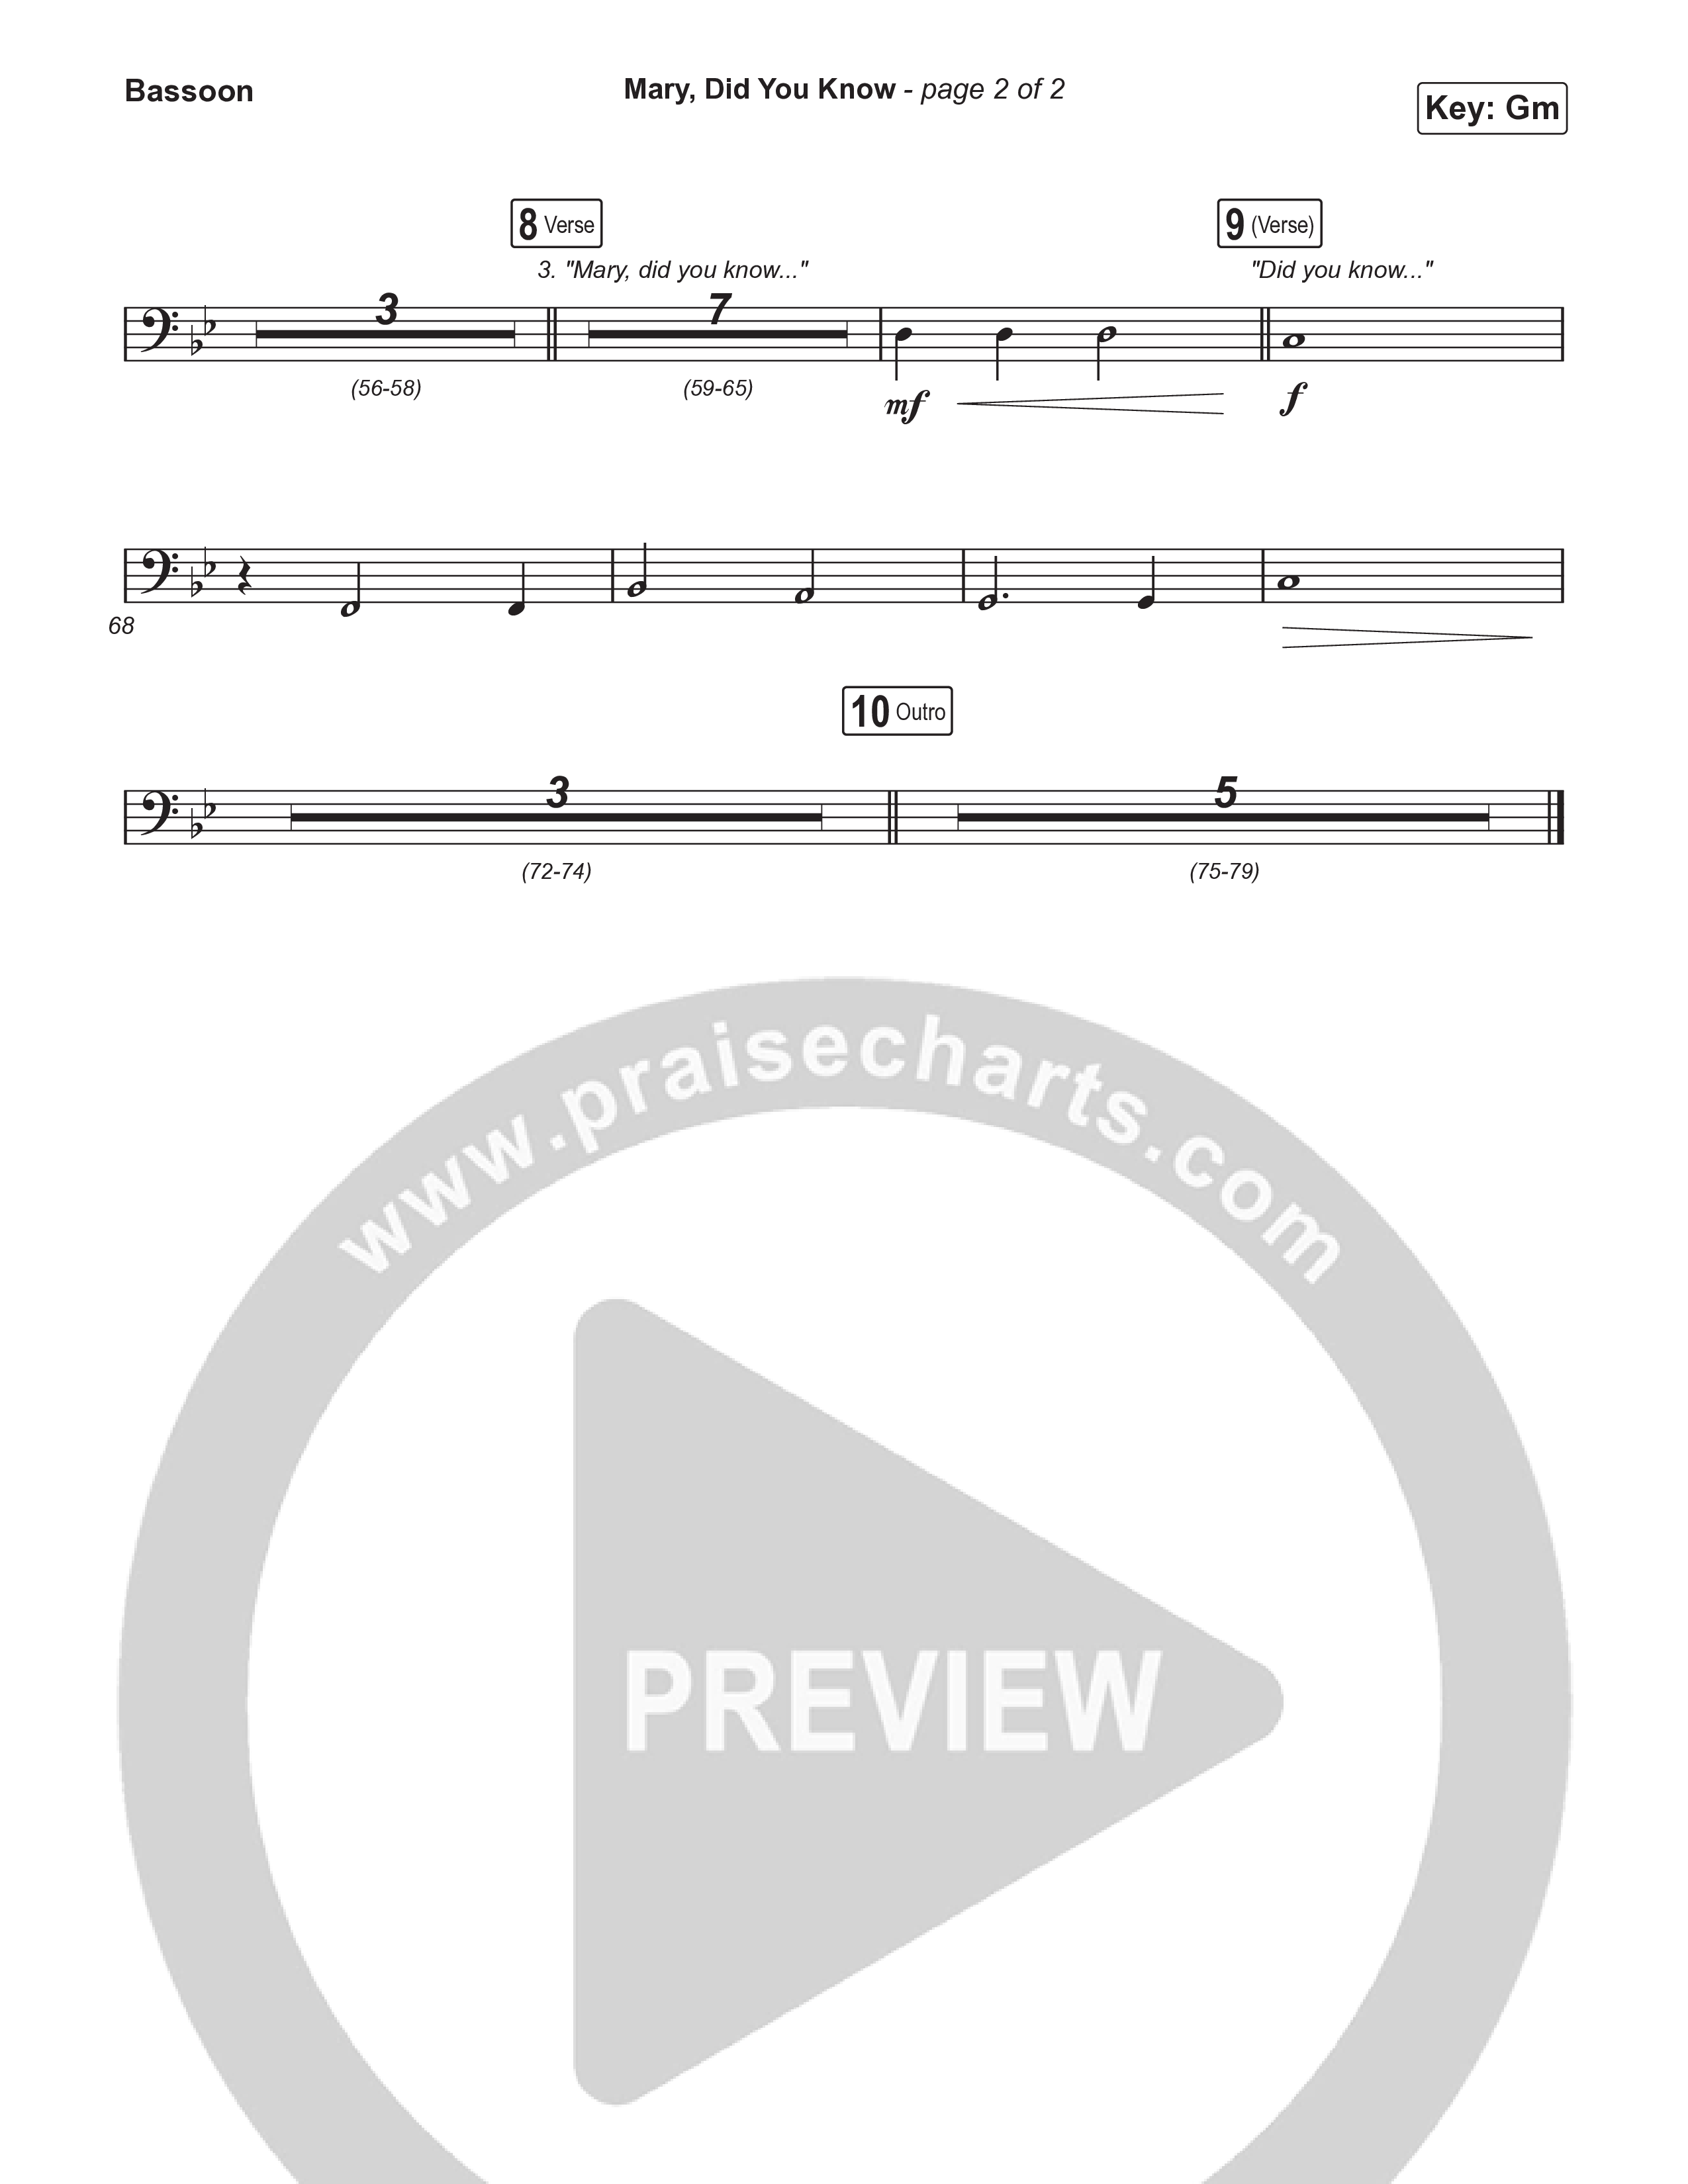 Mary Did You Know (Choral Anthem SATB) Bassoon (Anne Wilson / Arr. Luke Gambill)